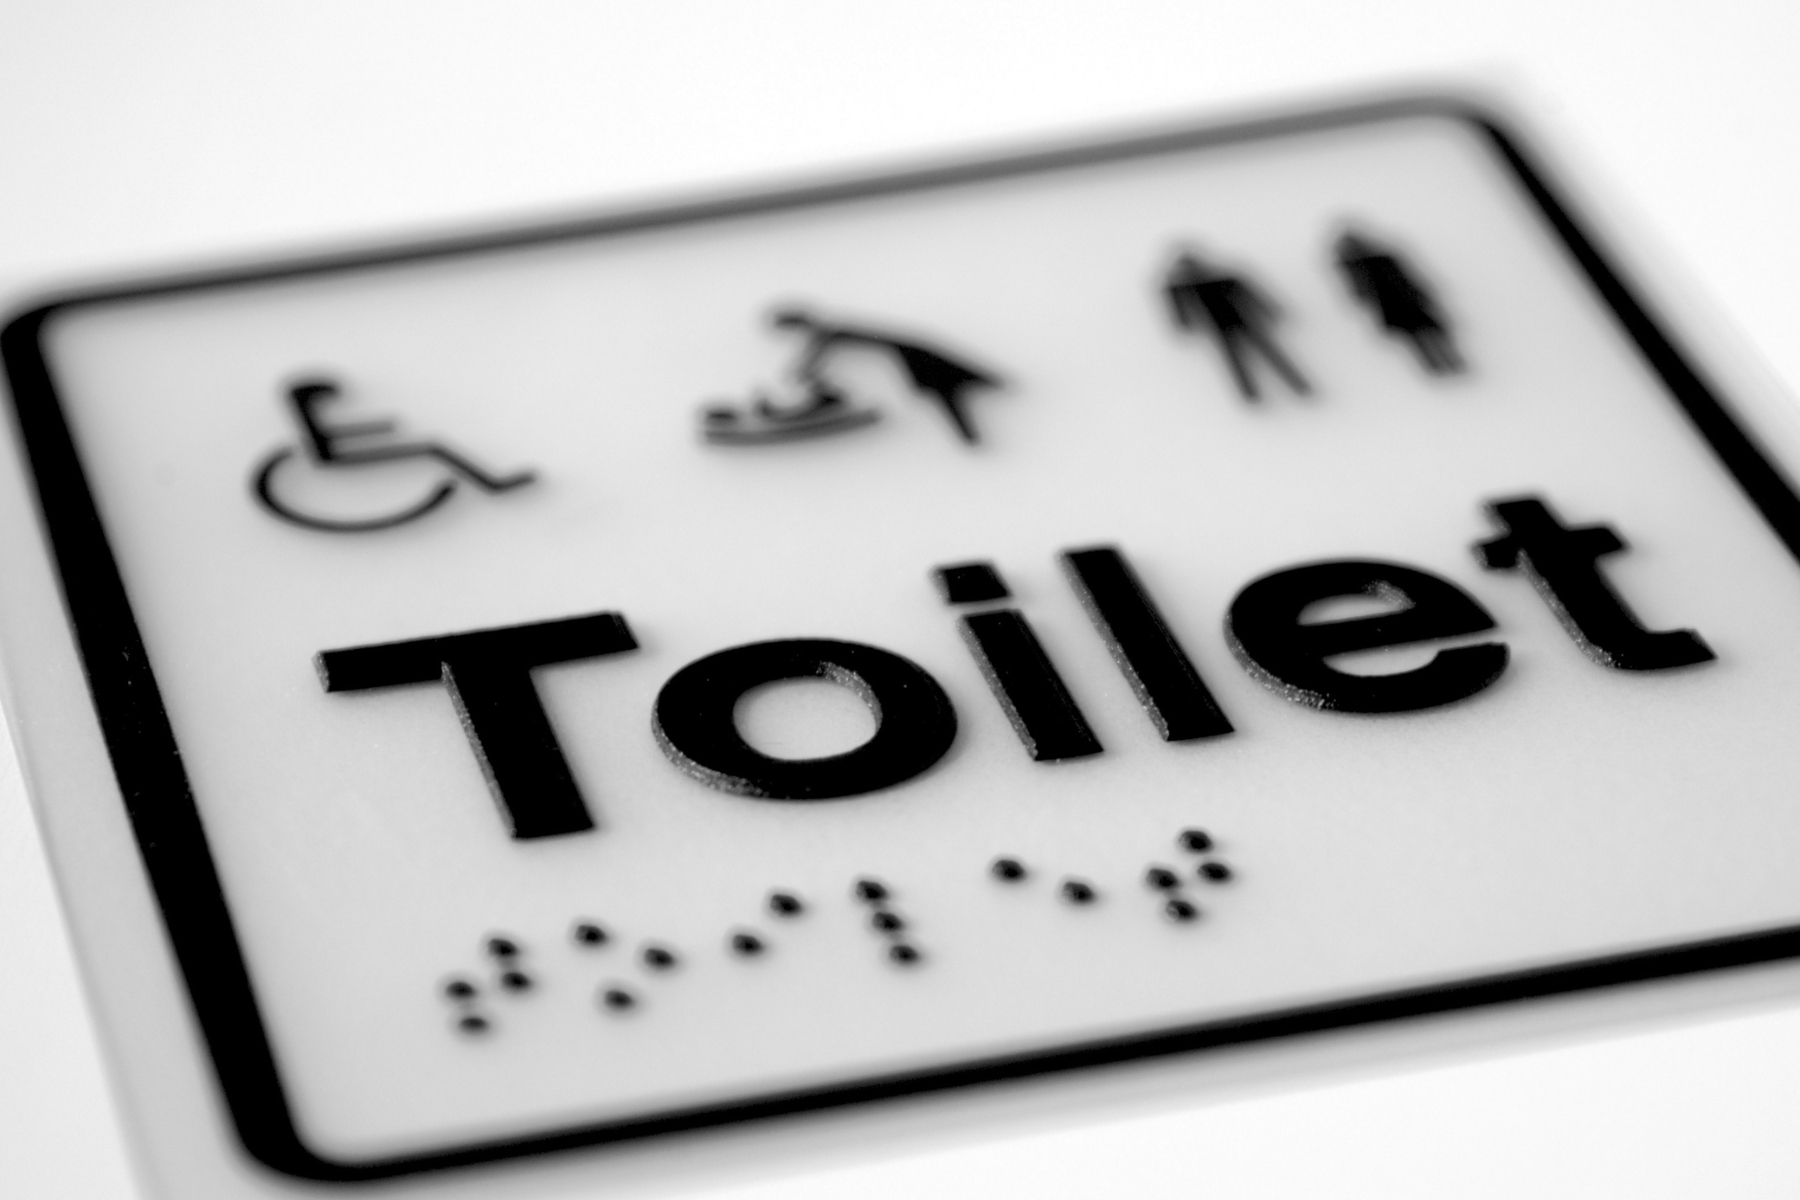 Mimaki digitally printed Braille on a toilet sign